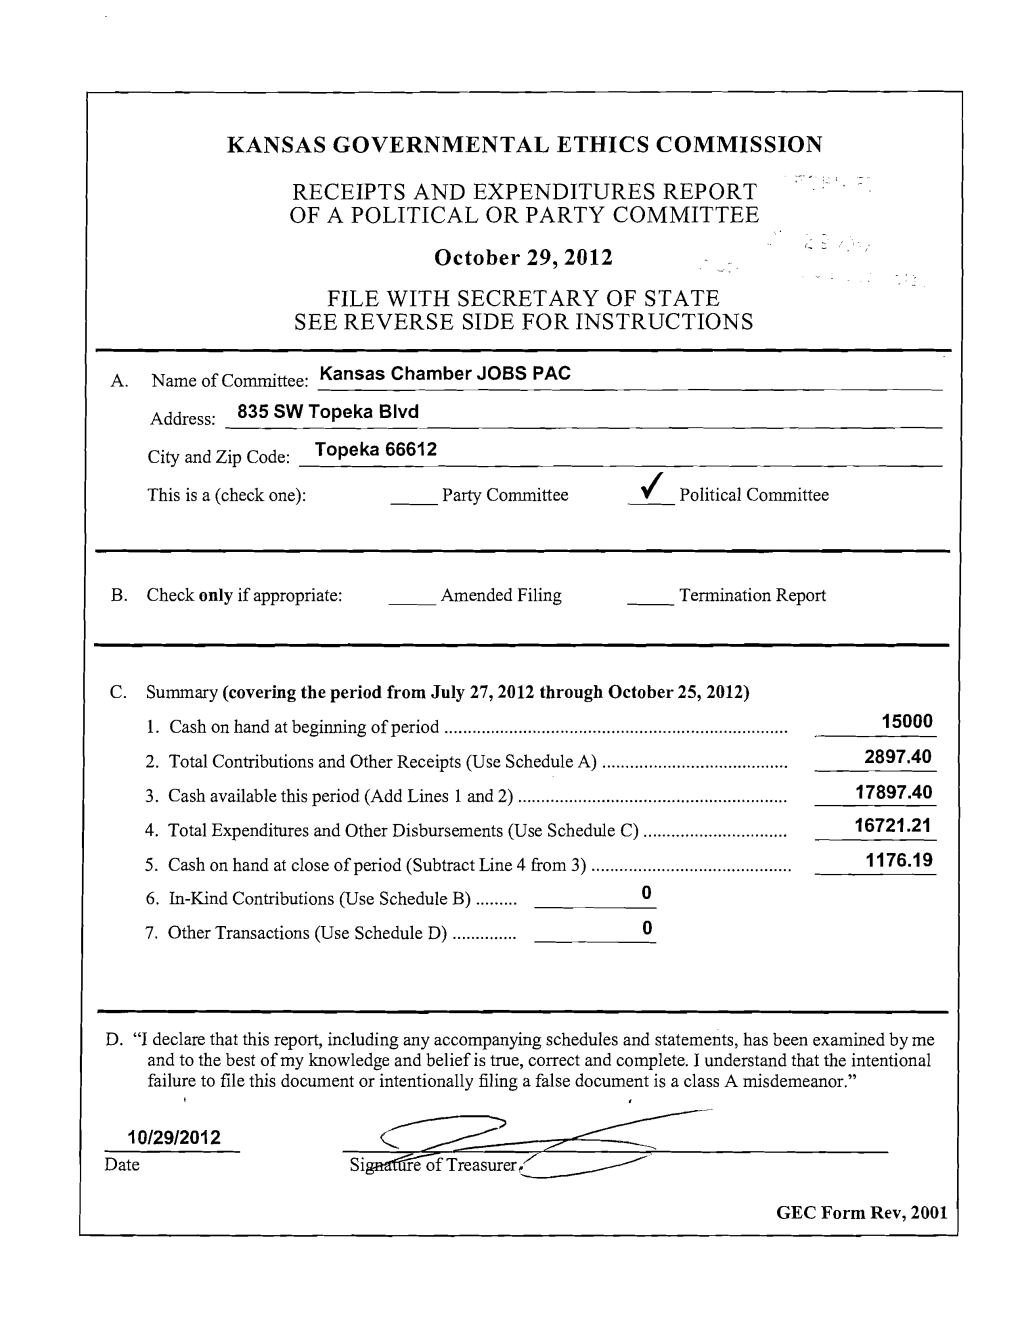 KANSAS GOVERNMENTAL ETHICS COMMISSION RECEIPTS and EXPENDITURES REPORT of a POLITICAL OR PARTY COMNIITTEE October 29, 2012 FILE